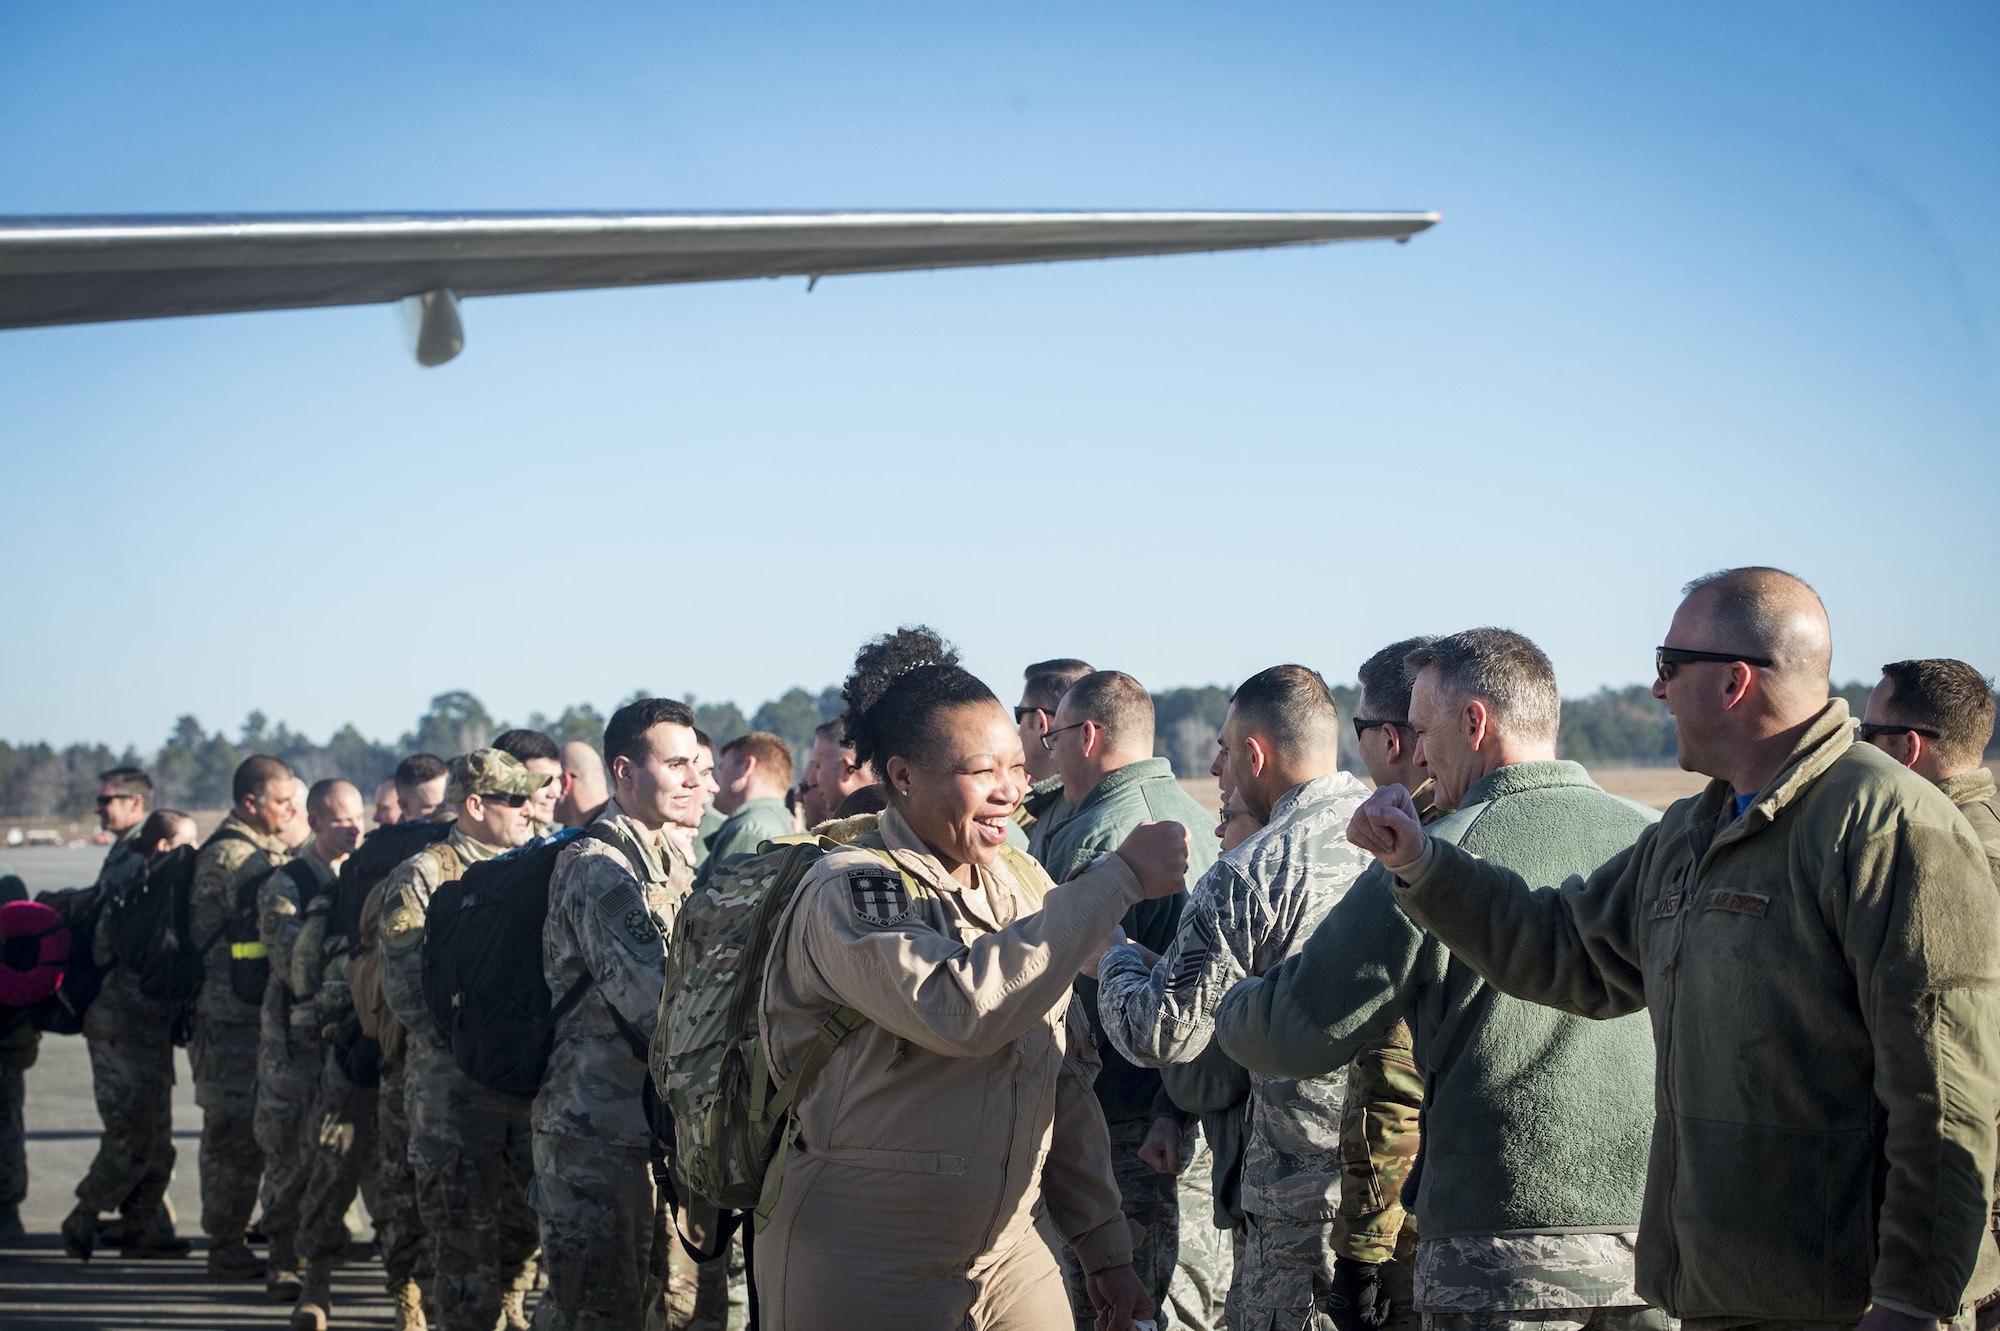 Airmen from the 74th Fighter Squadron (FS) greet base leadership during a redeployment ceremony, Jan. 19, 2018, at Moody Air Force Base, Ga. The 74th FS conducted around-the-clock planning and operations, which have decimated ISIS’ fighting capacity with precise strikes, erasing tens of thousands of fighters from ISIS rosters.